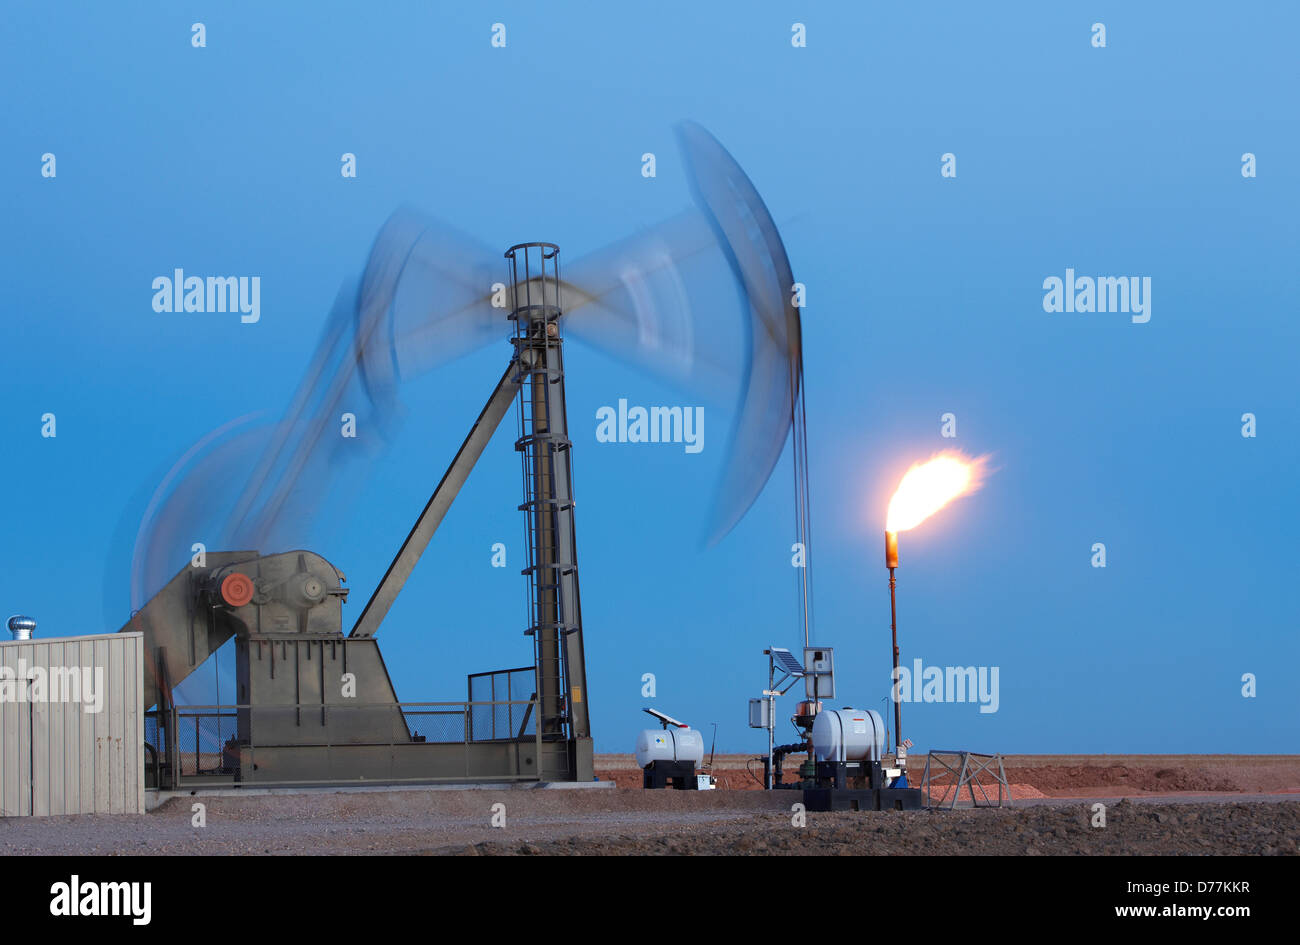 Oil well pumpjack pump jack gas flare flare stack eastern plains Colorado Oil well developed hydraulic fracturing also known as Stock Photo